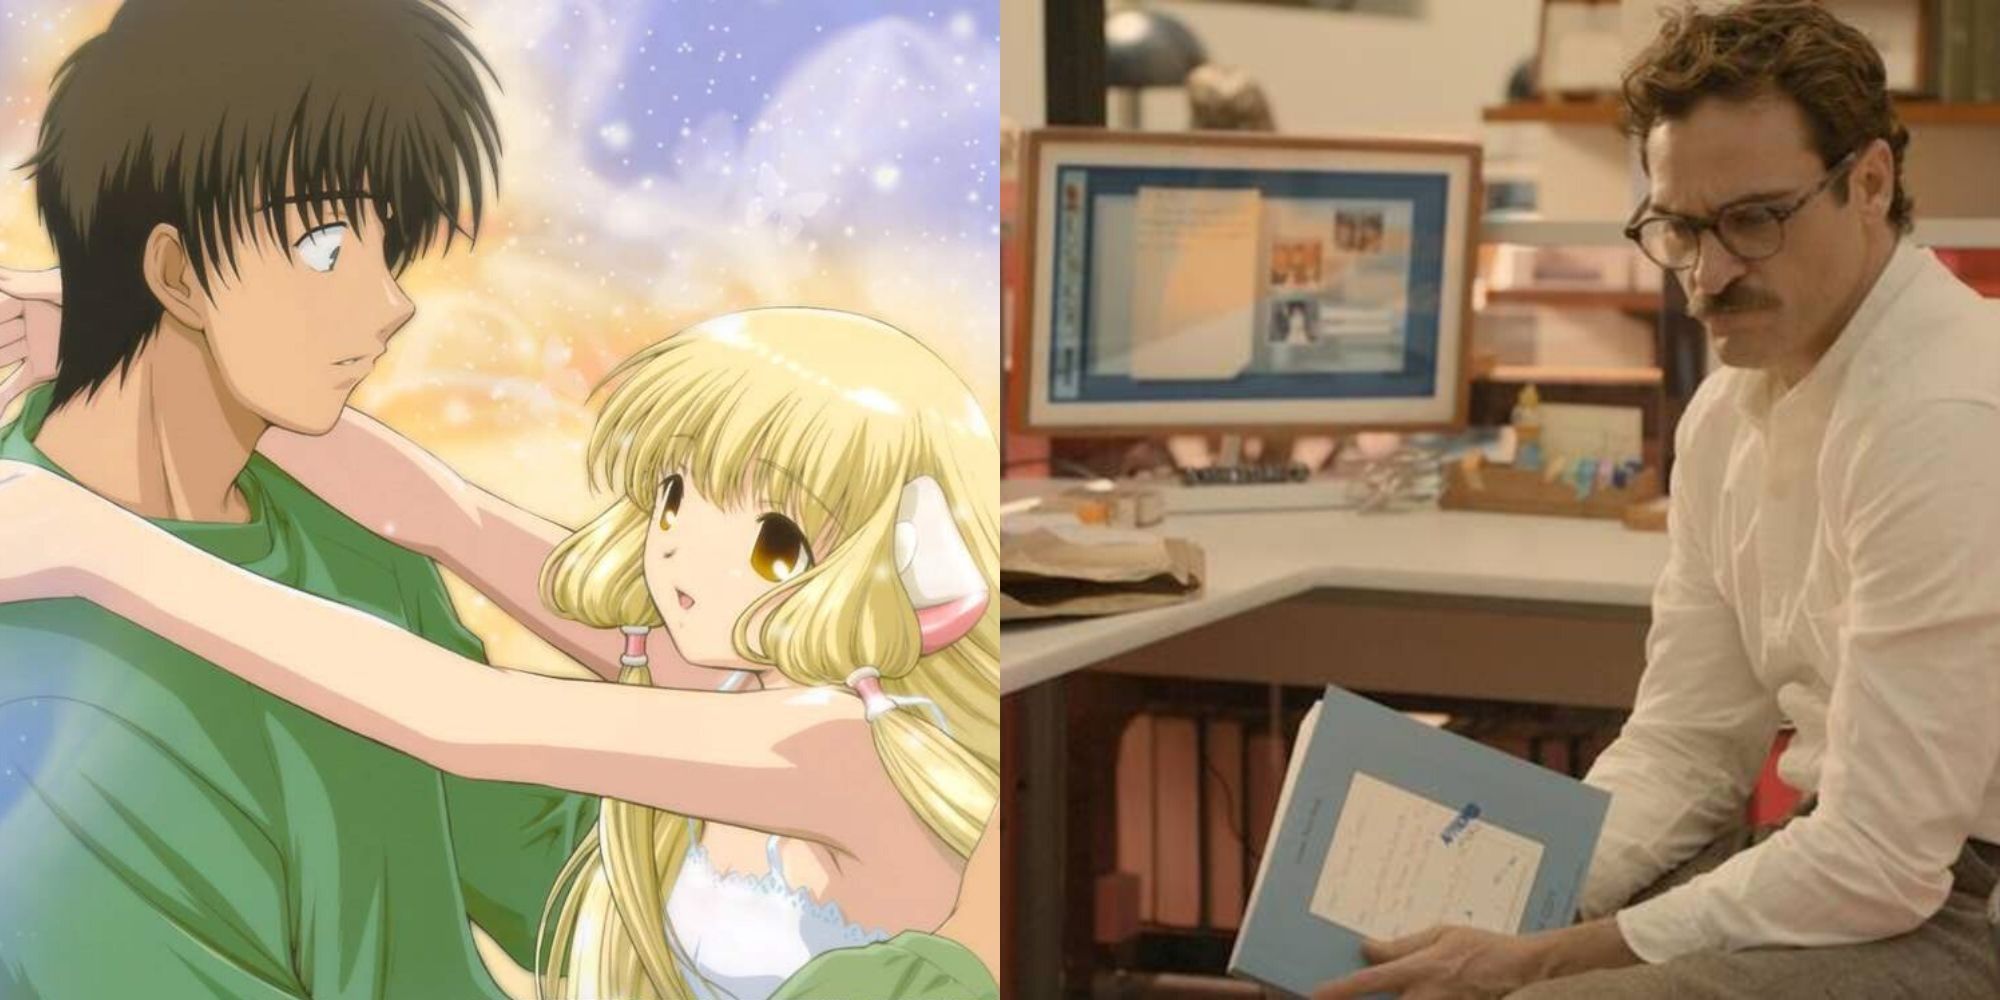 A split image of Chobits and Joaquin Phoenix in HER.